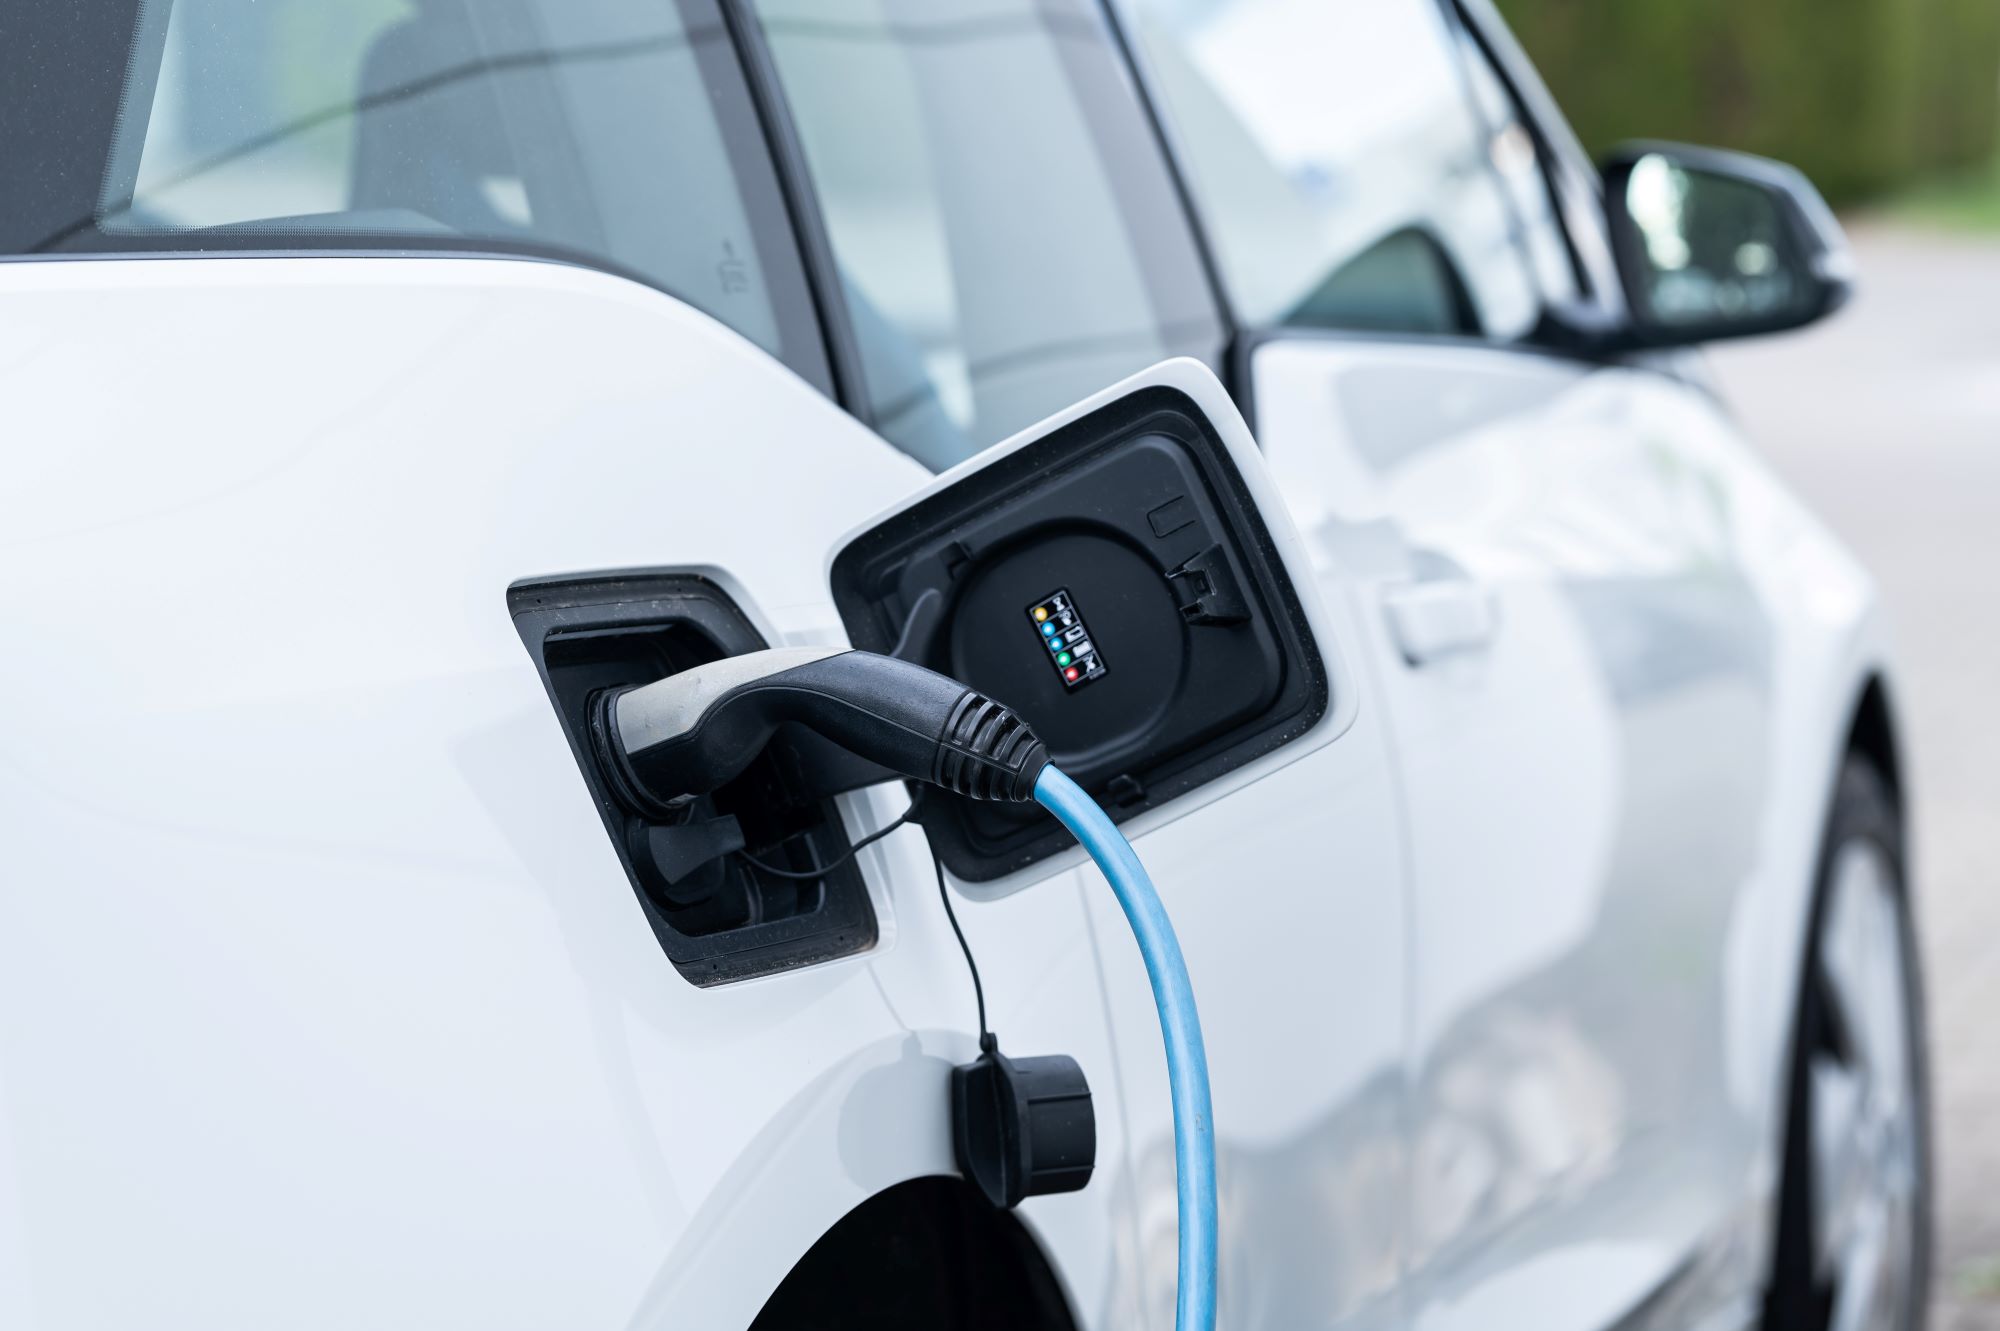 An EV charging, which to do on a wide range will need proper EV infrastructure.